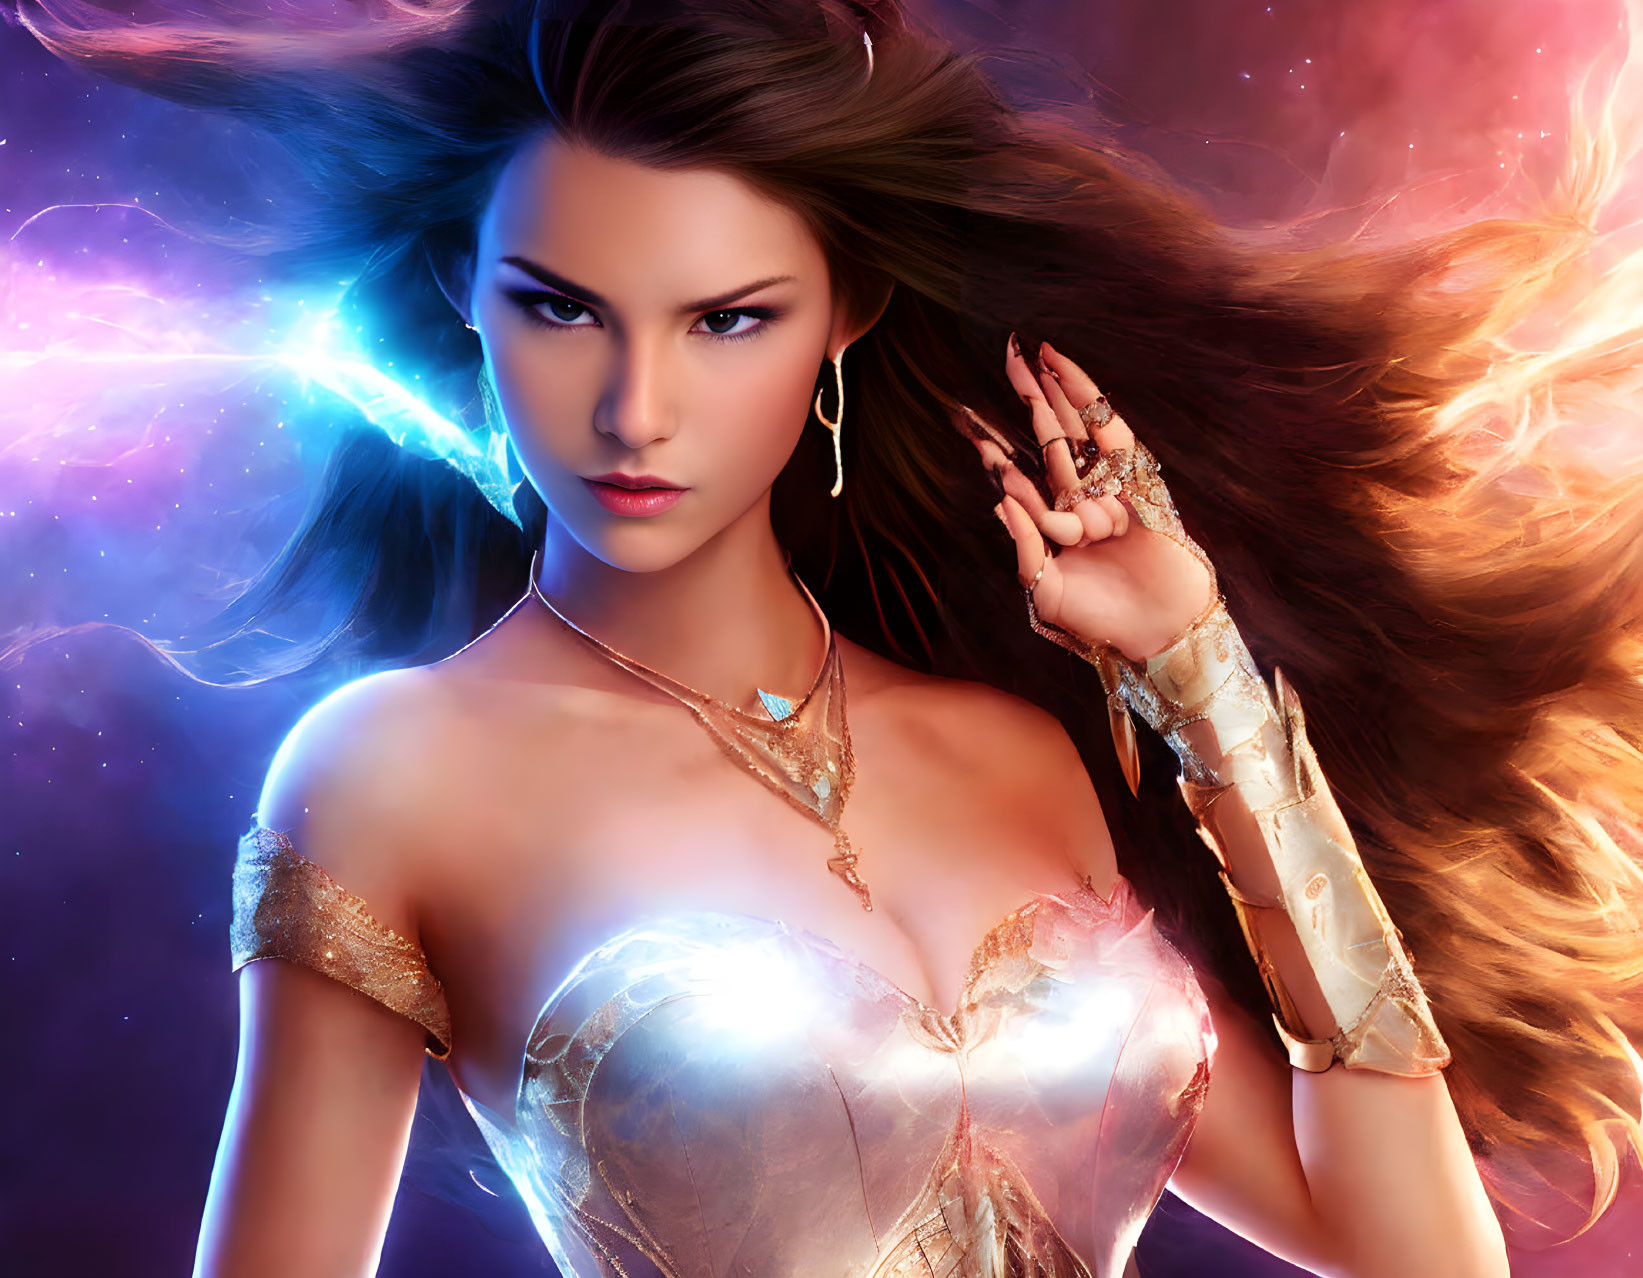 Fantasy digital art portrait of a woman with flowing hair and fiery background.